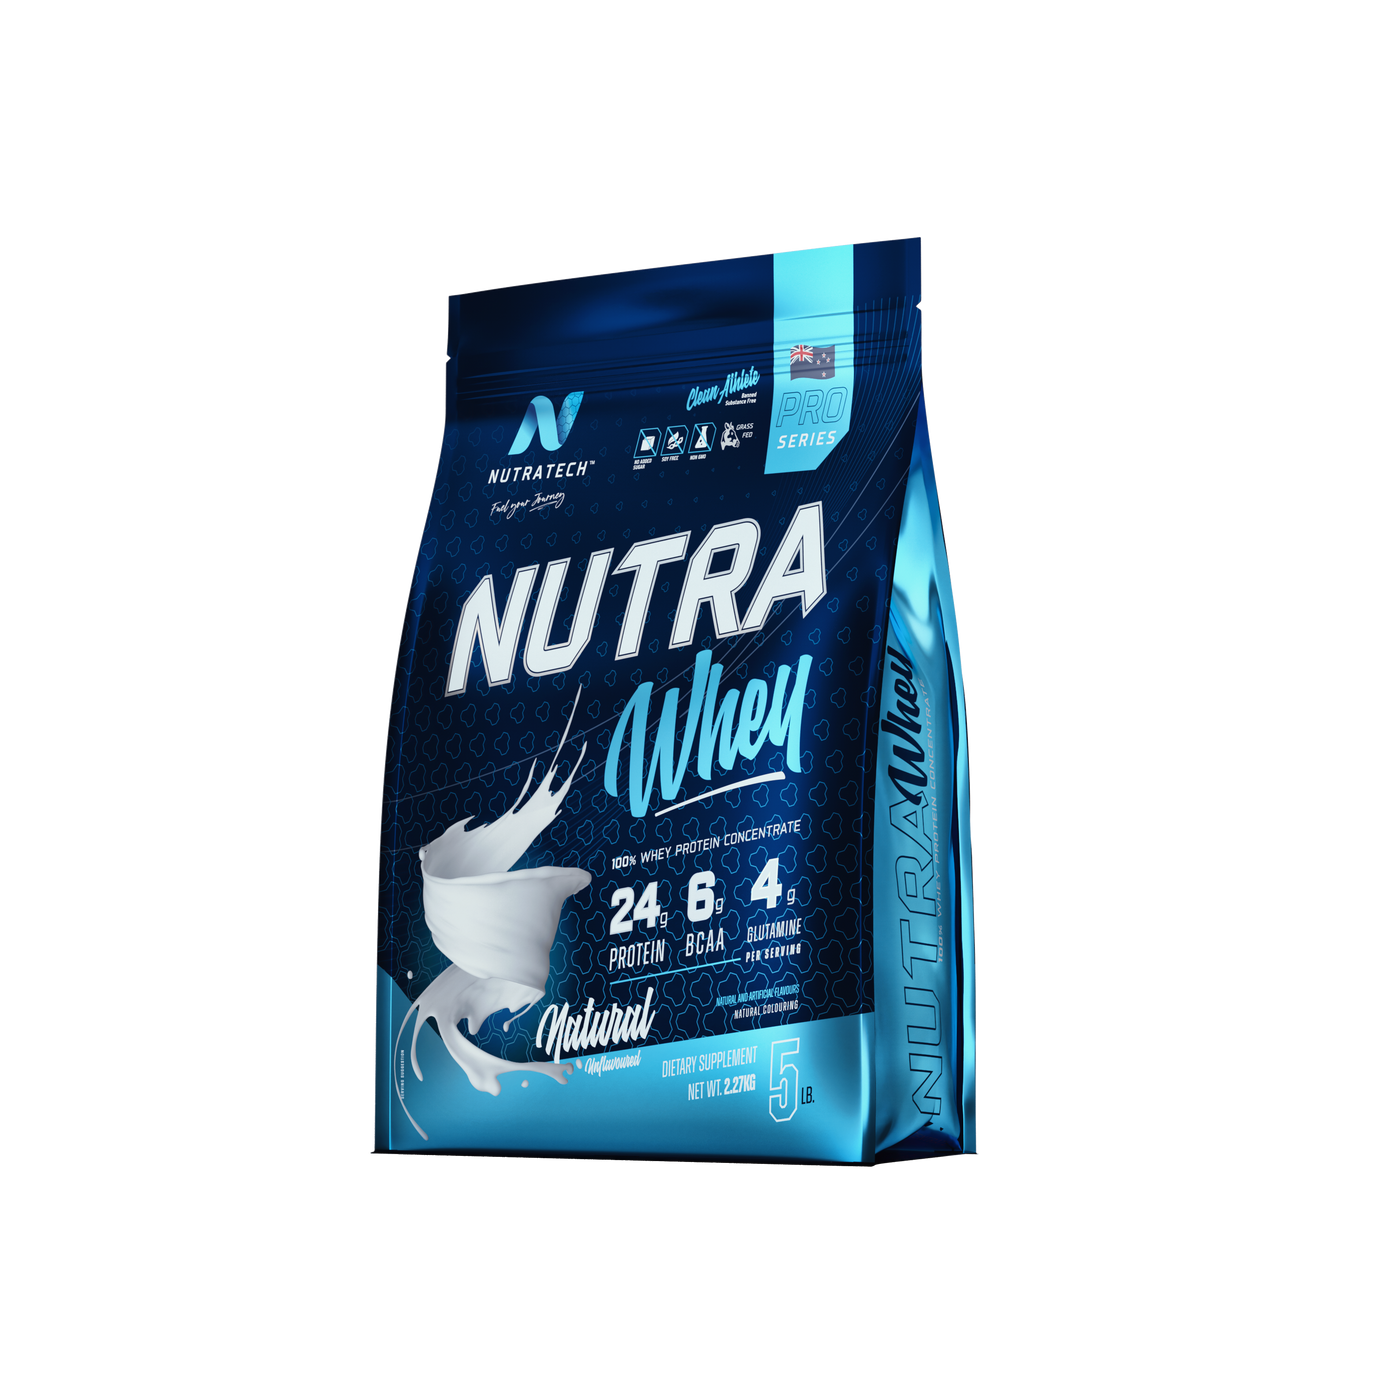 Nutra Whey | Natural Whey Protein Powder